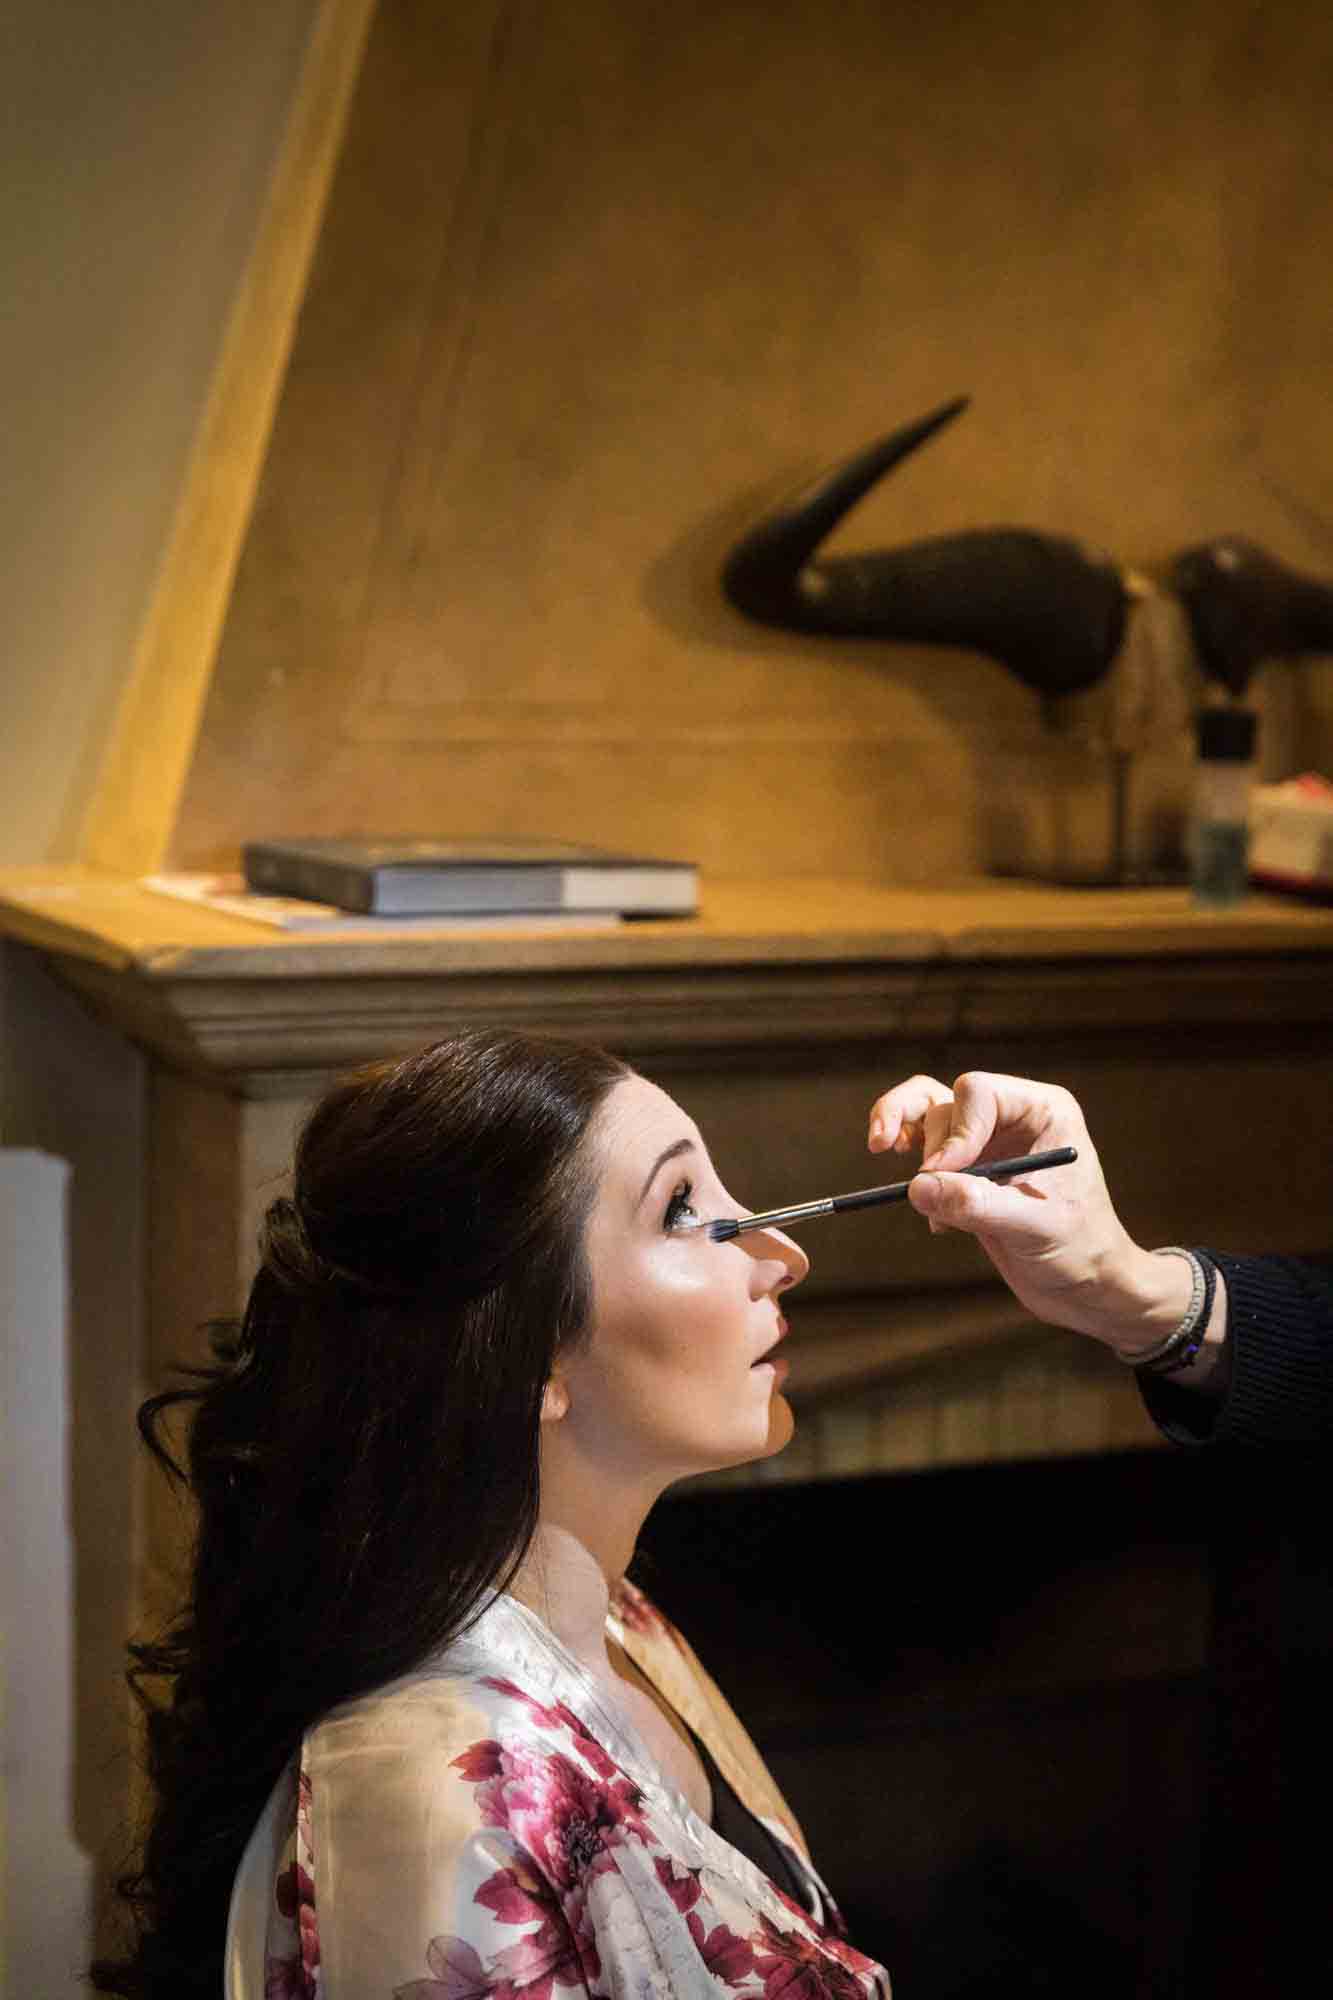 Eye makeup being applied to woman sitting